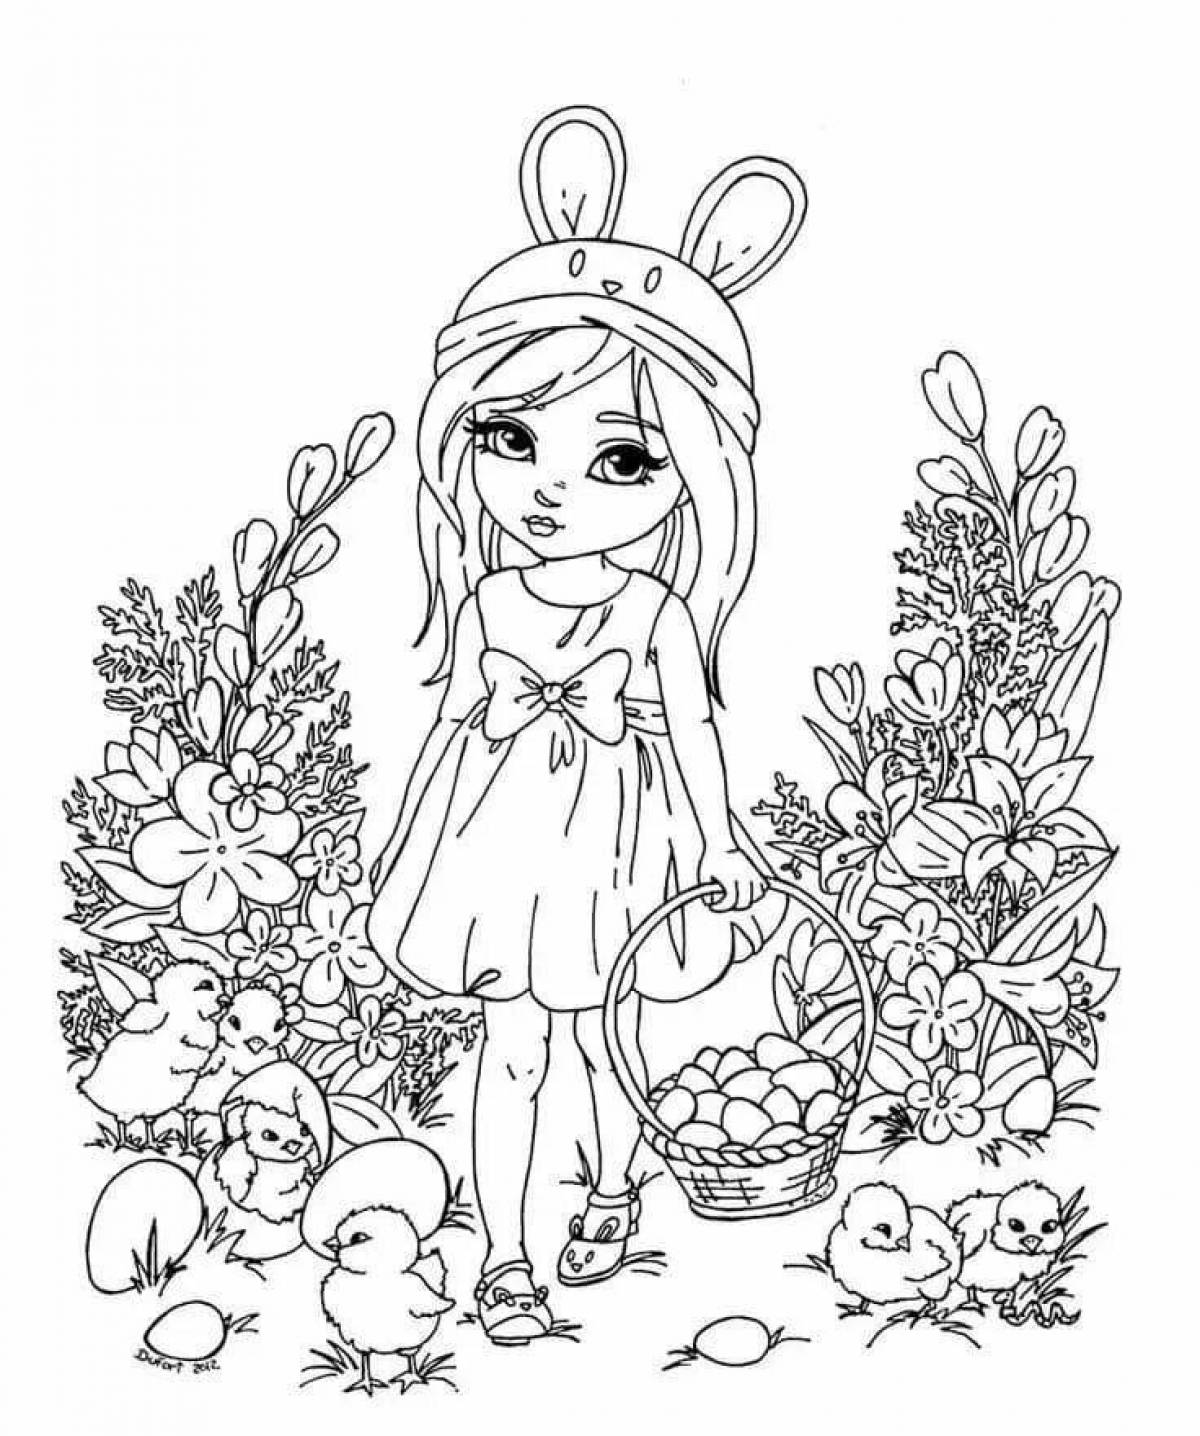 Playful coloring book popular with girls